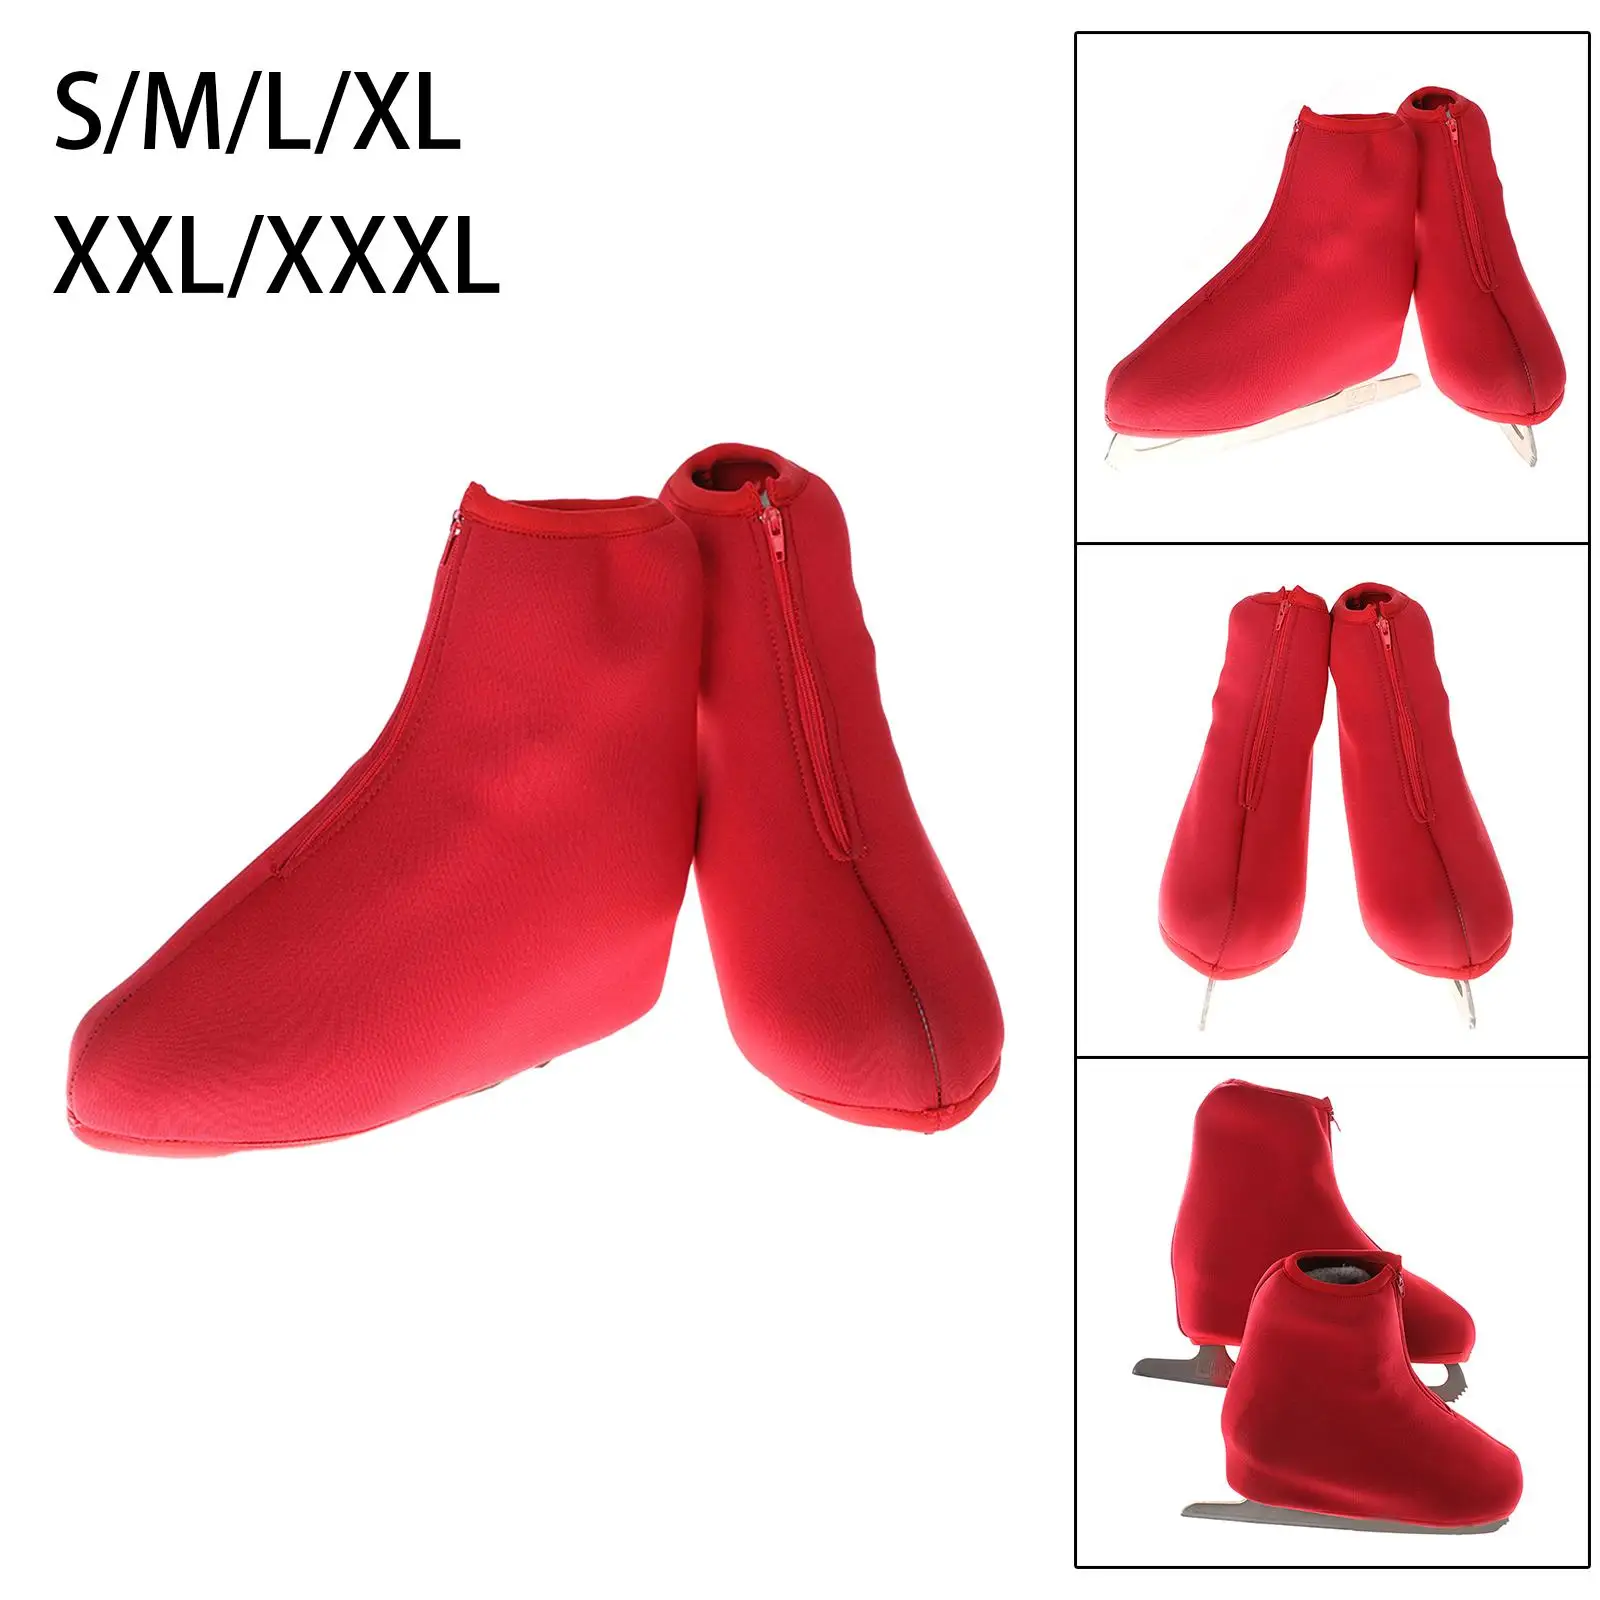 1 Pair Ice Skate Boot Covers Accessories Shoes Protector Figure Skating Boot Covers for Figure Skates Roller Skates Ice Skating